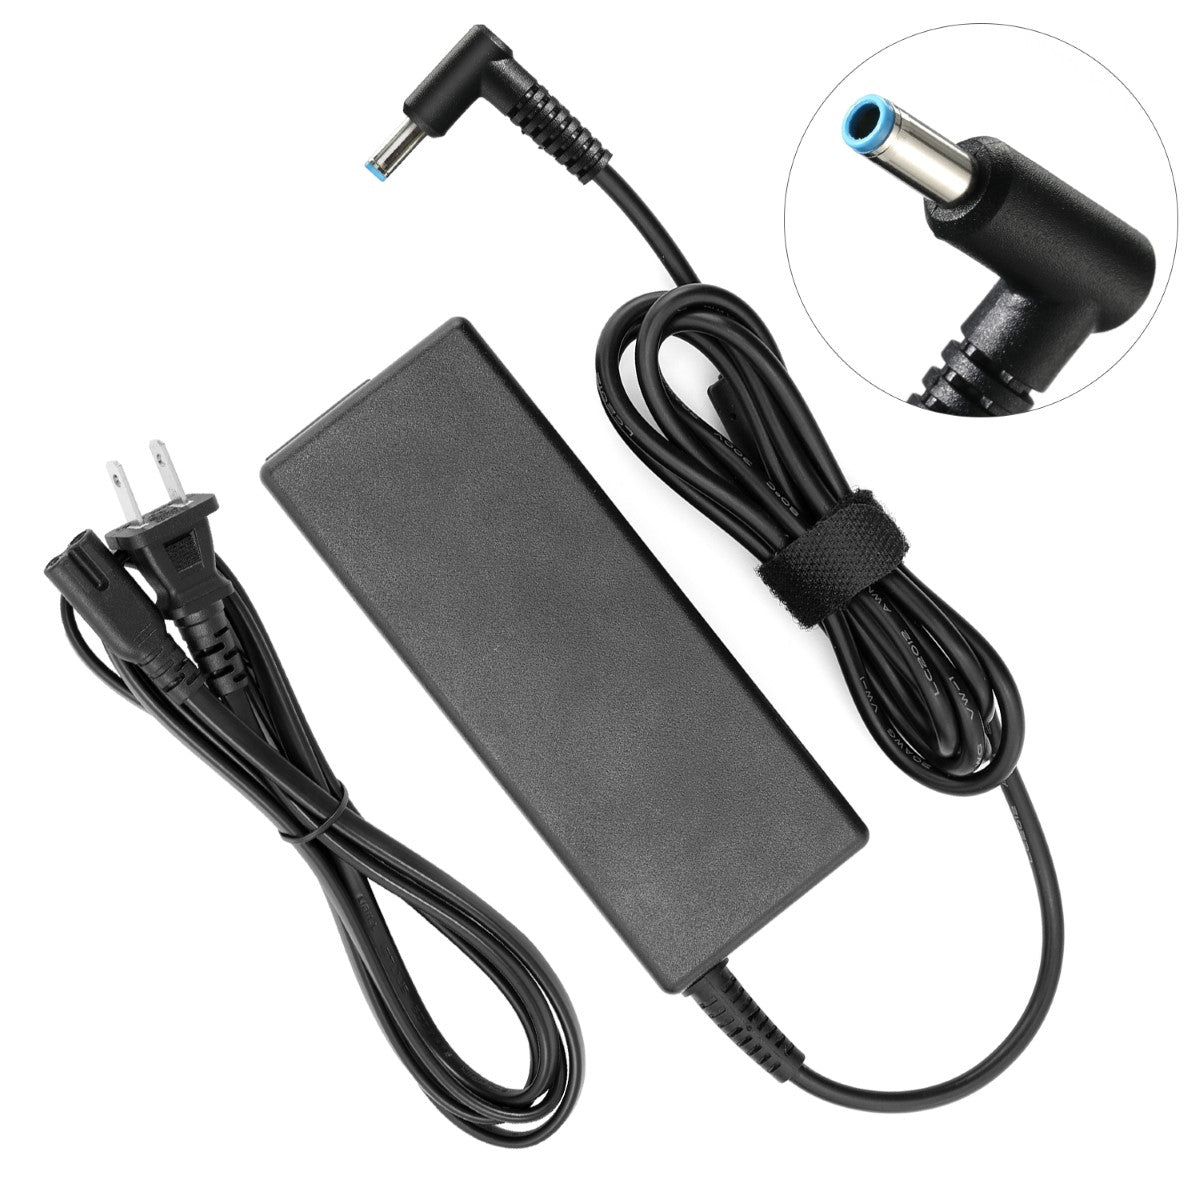 AC Adapter Charger for hp Envy Touchsmart 15-k016nr Notebook.